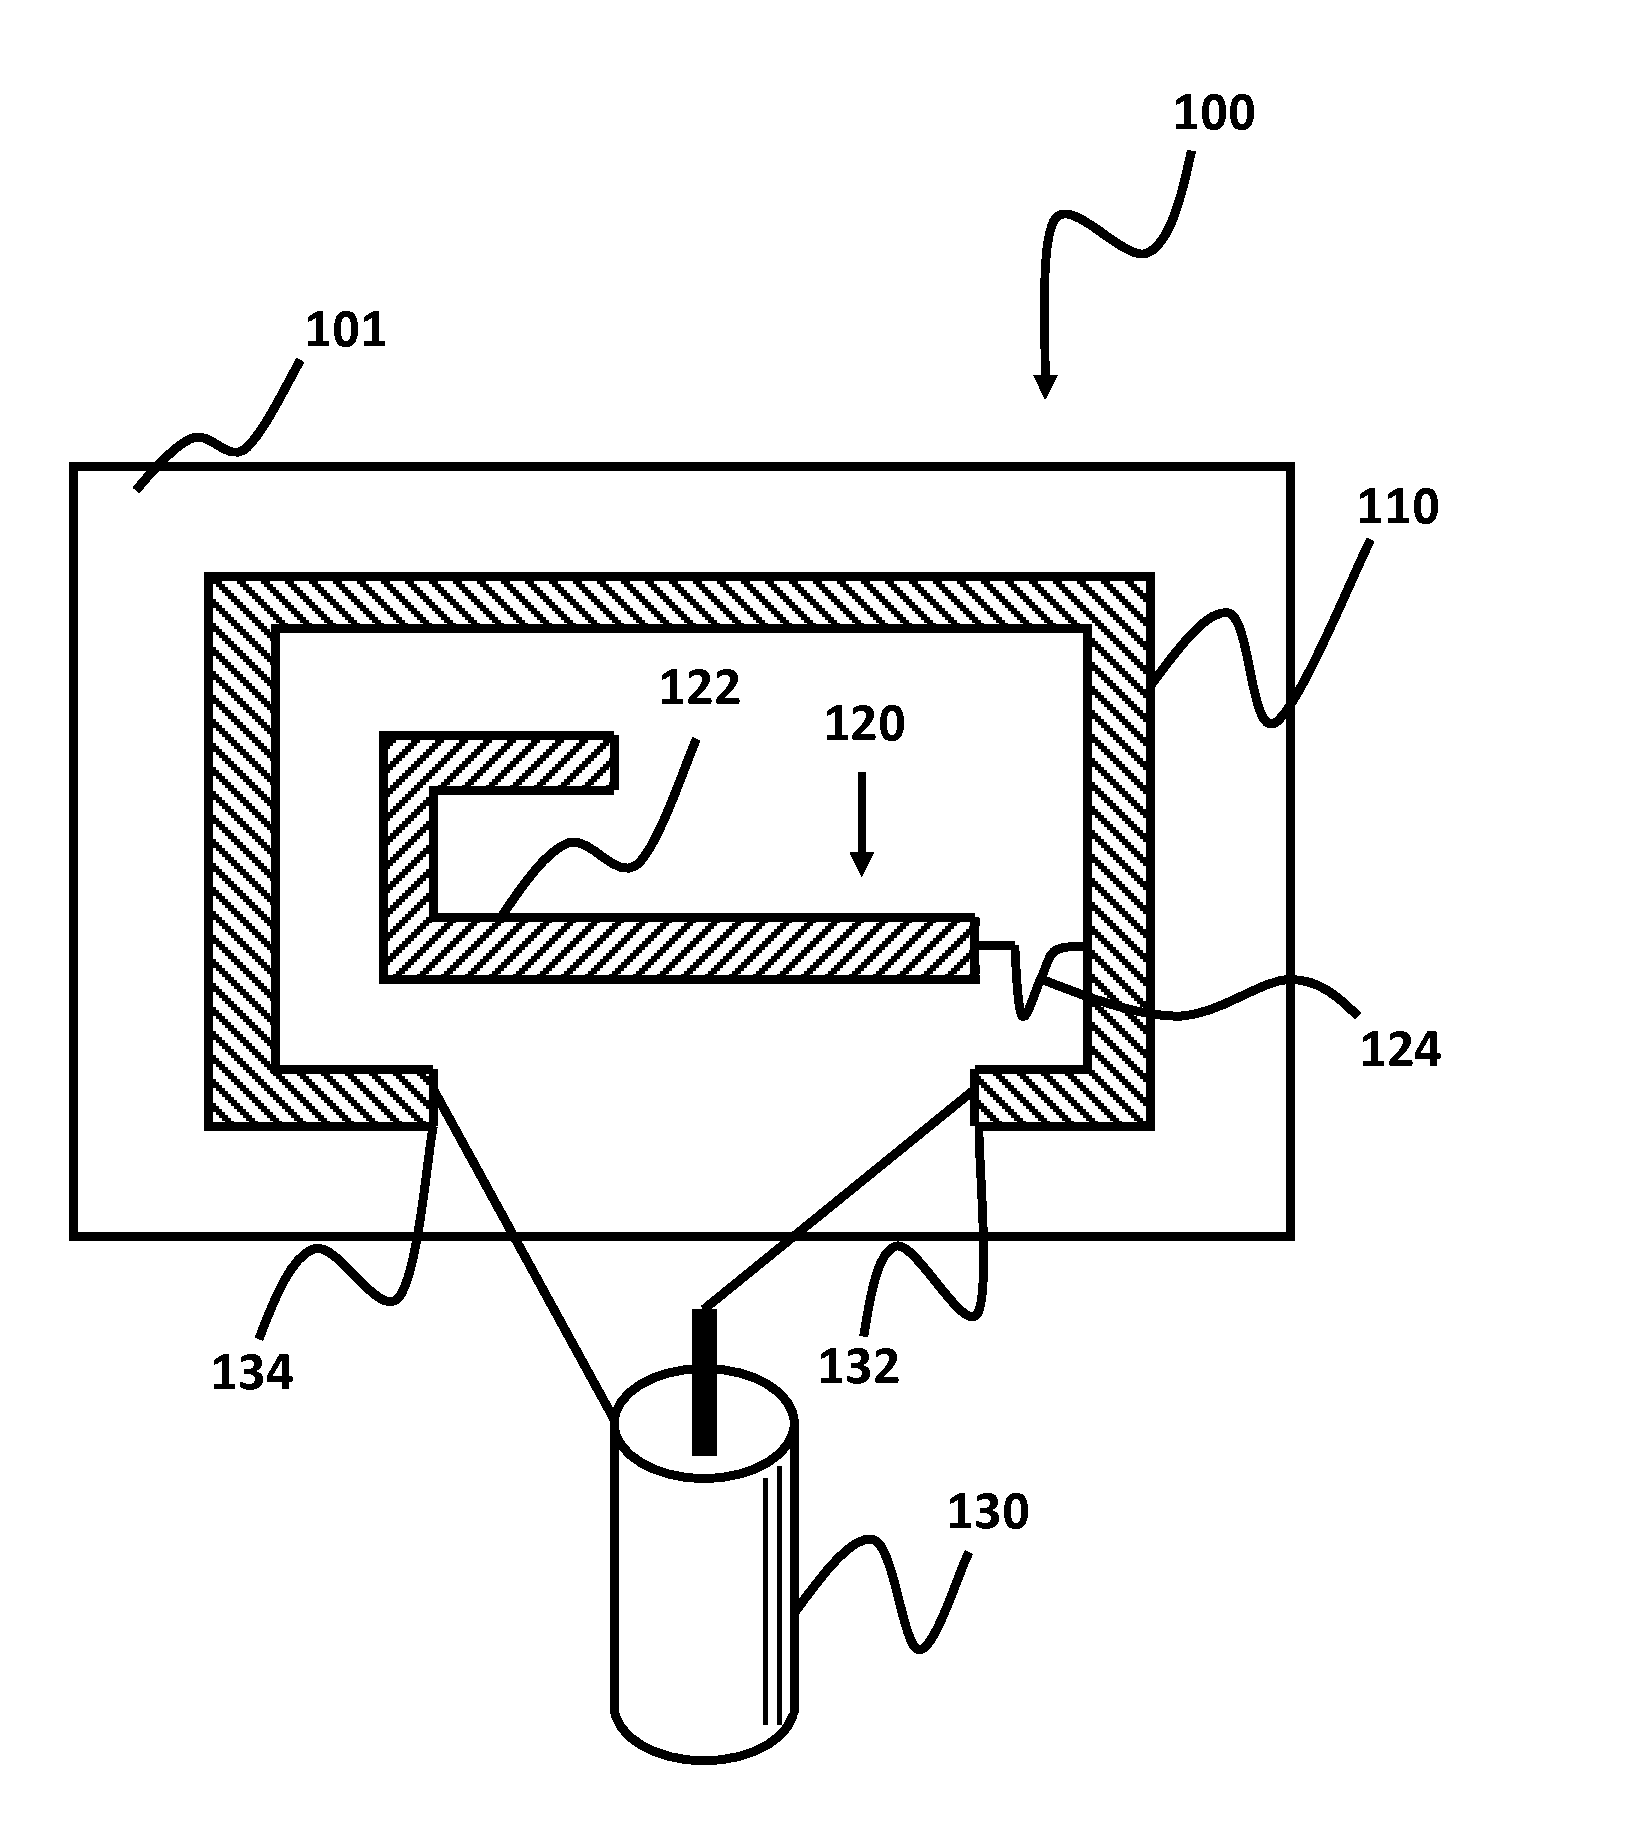 Self-contained counterpoise compound loop antenna